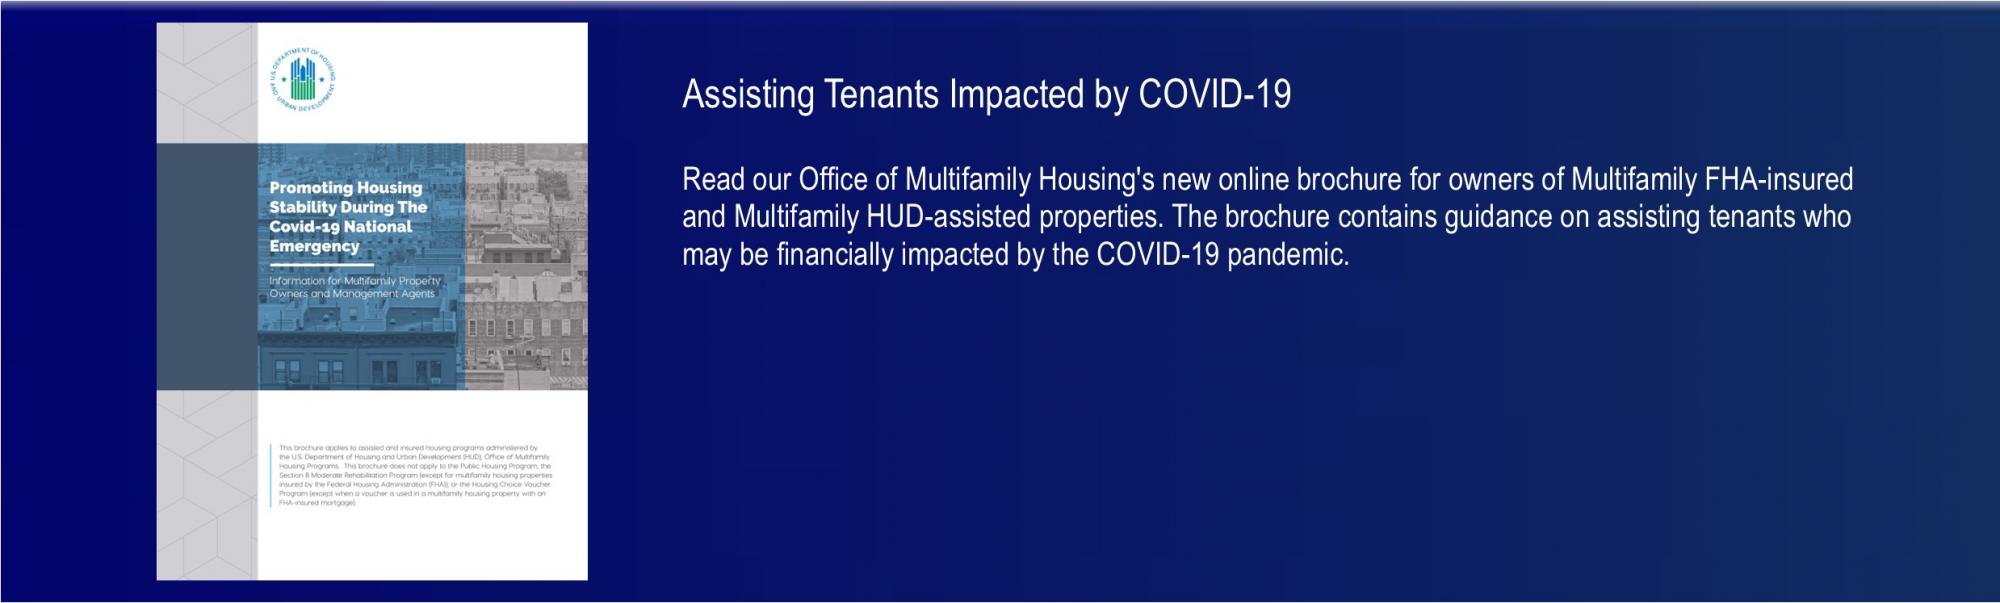 [Assisting Tenants Impacted by COVID-19]. HUD Photo